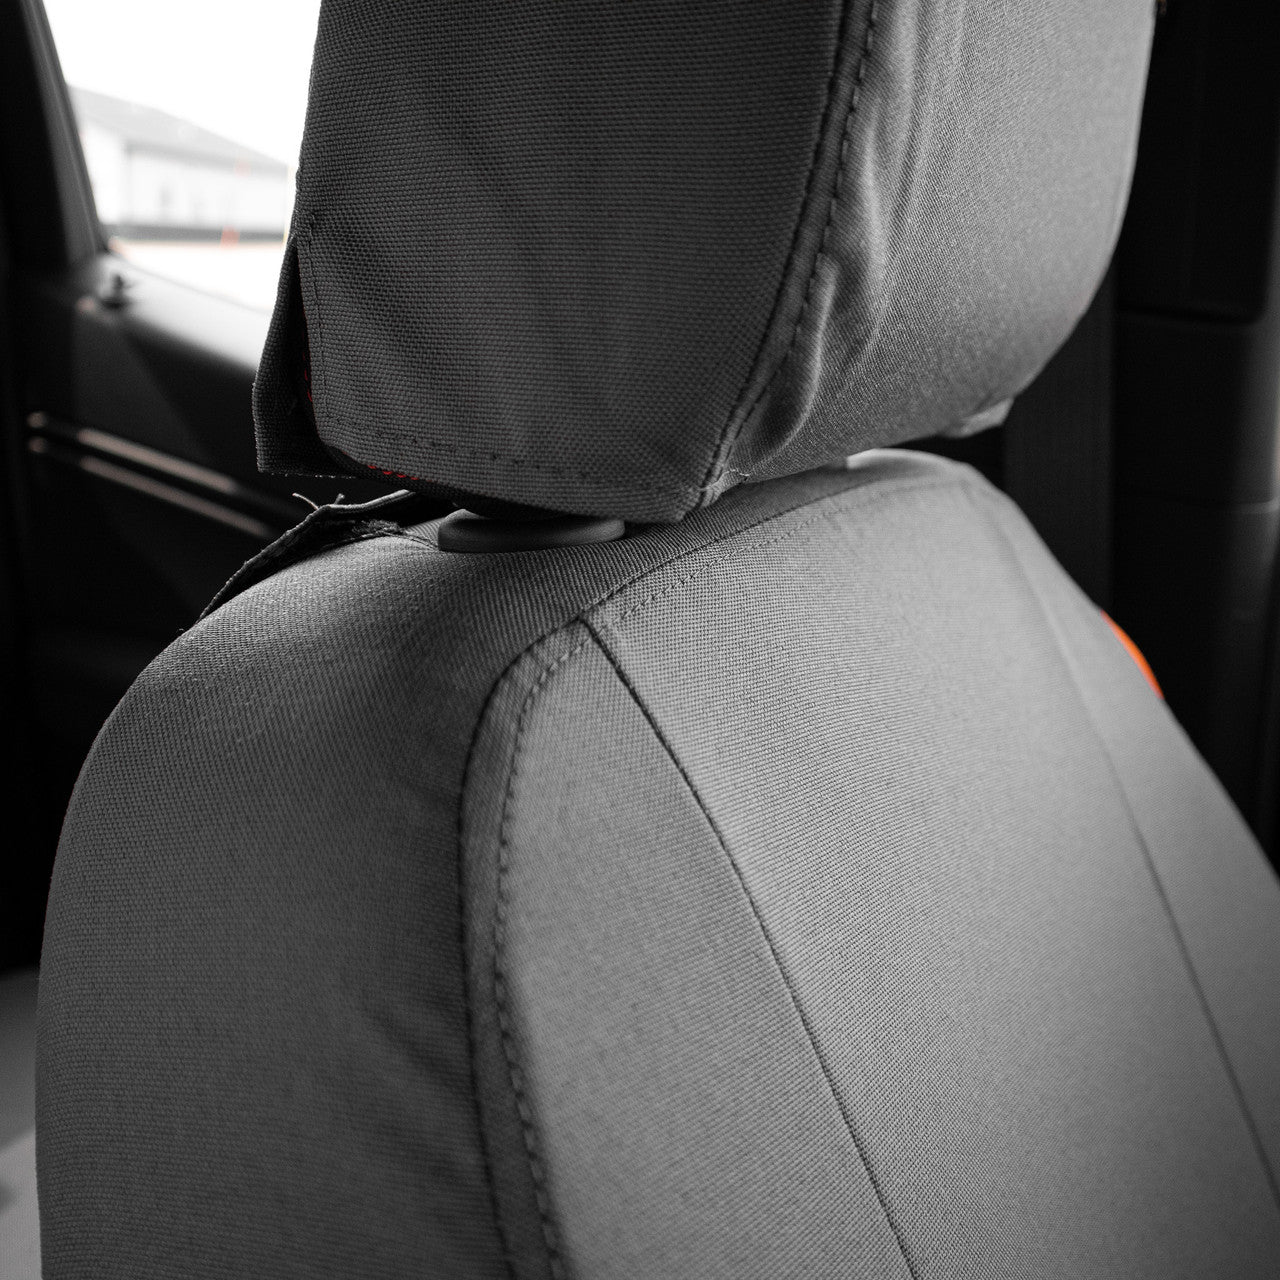 Headrest detail on the Seat Covers for the Chevy Colorado / GMC Canyon